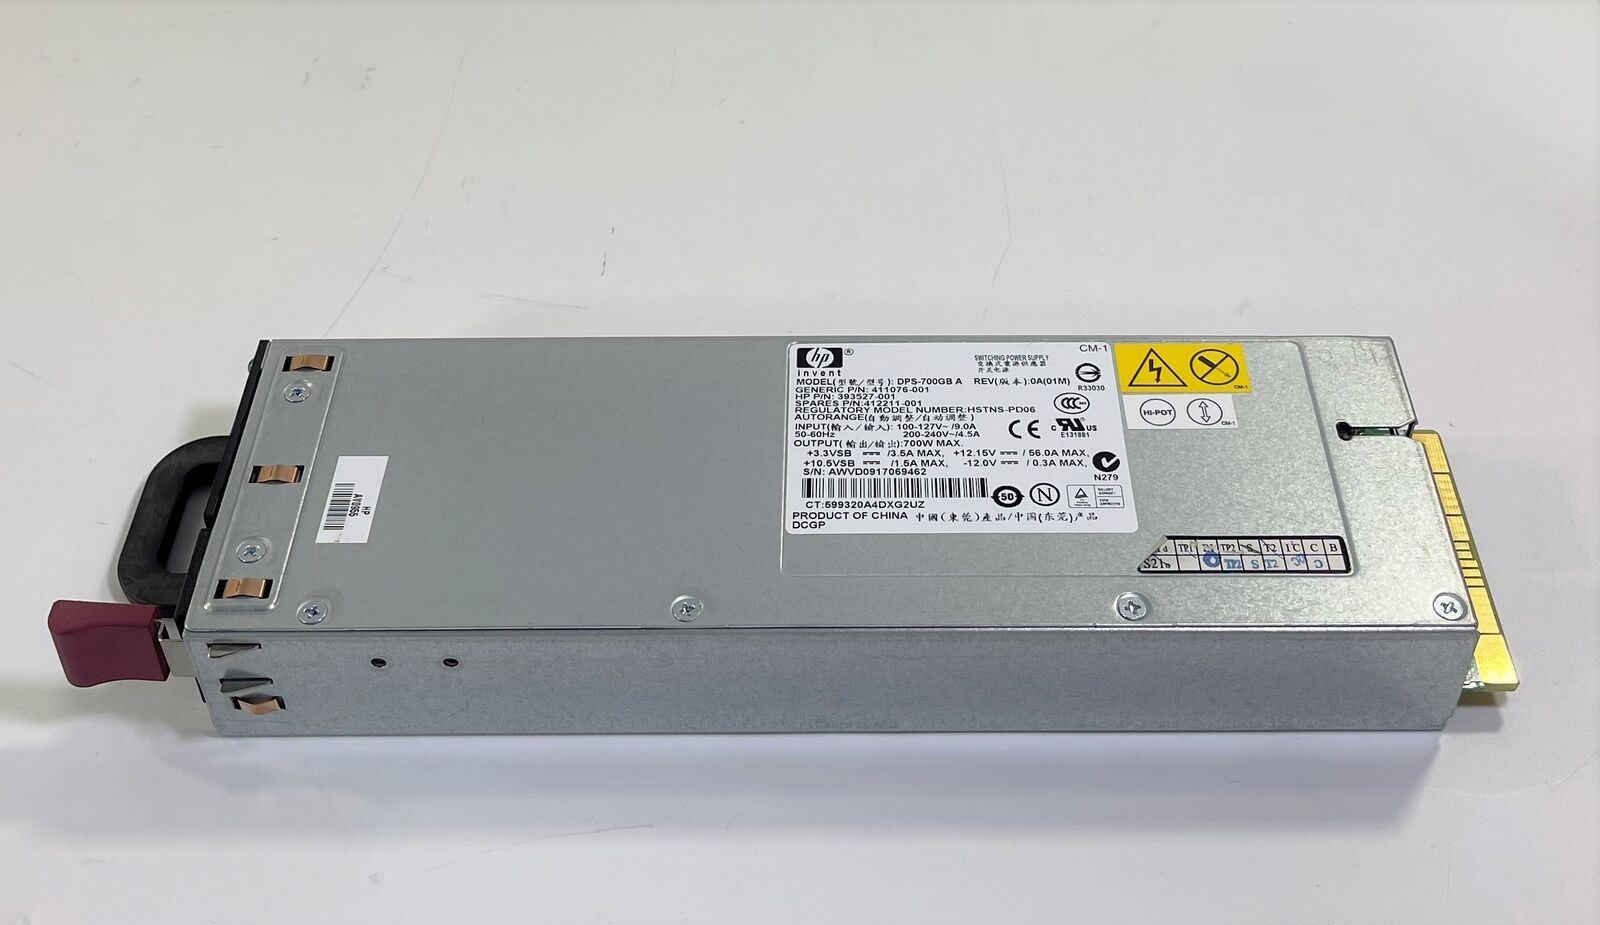 411076 001 393527 001 412211 001 HSTNS PD06 dps 700gb hp dps 700gb 700w power supply for proliant dl360 g5